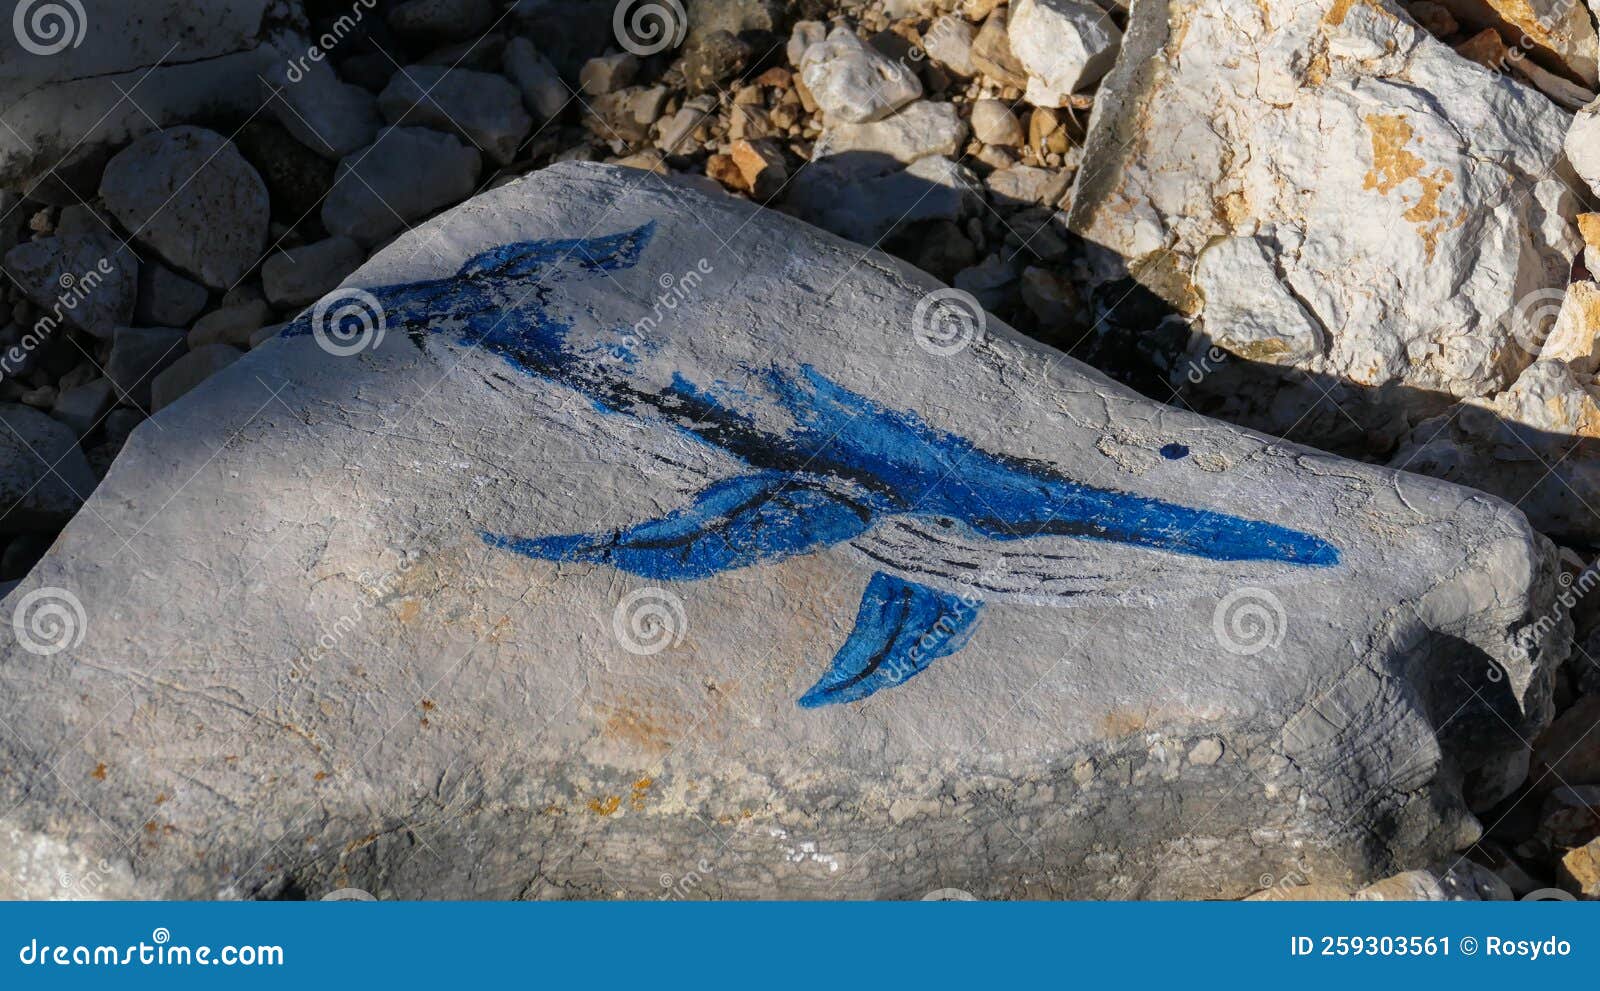 drawing of a whale on a stone by the sea